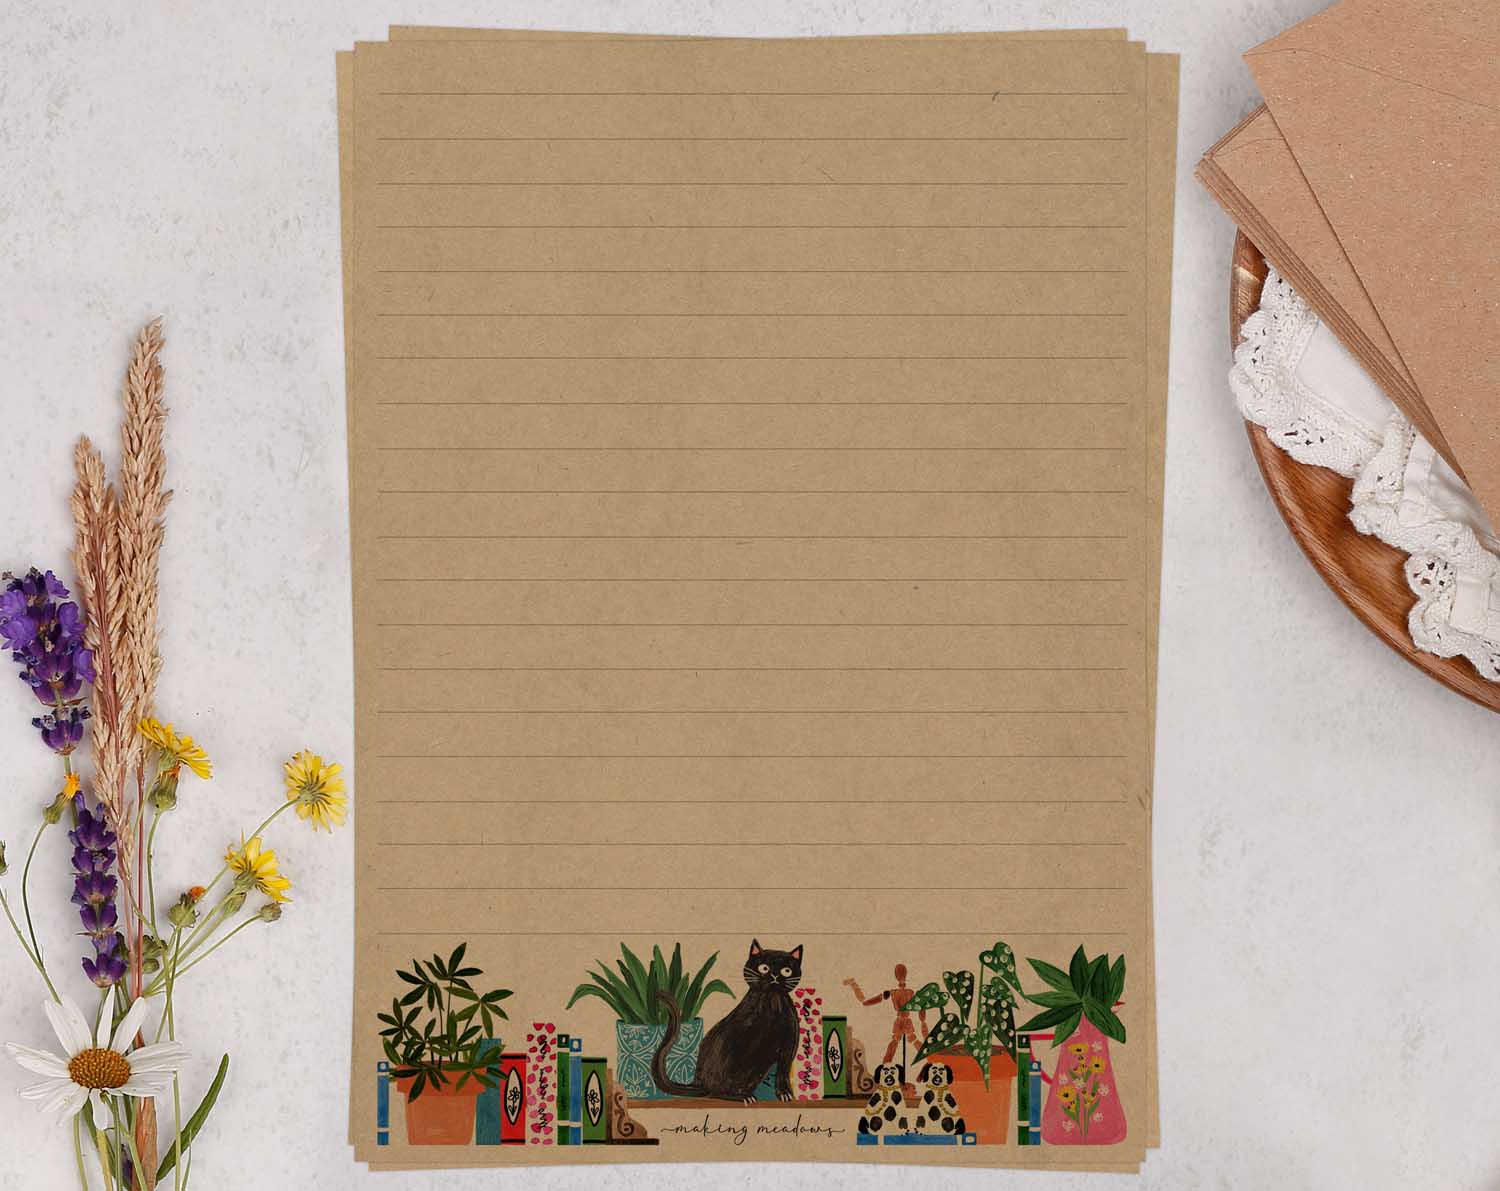 A5 Kraft letter writing paper sheets with books on bookshelf and a cat design.